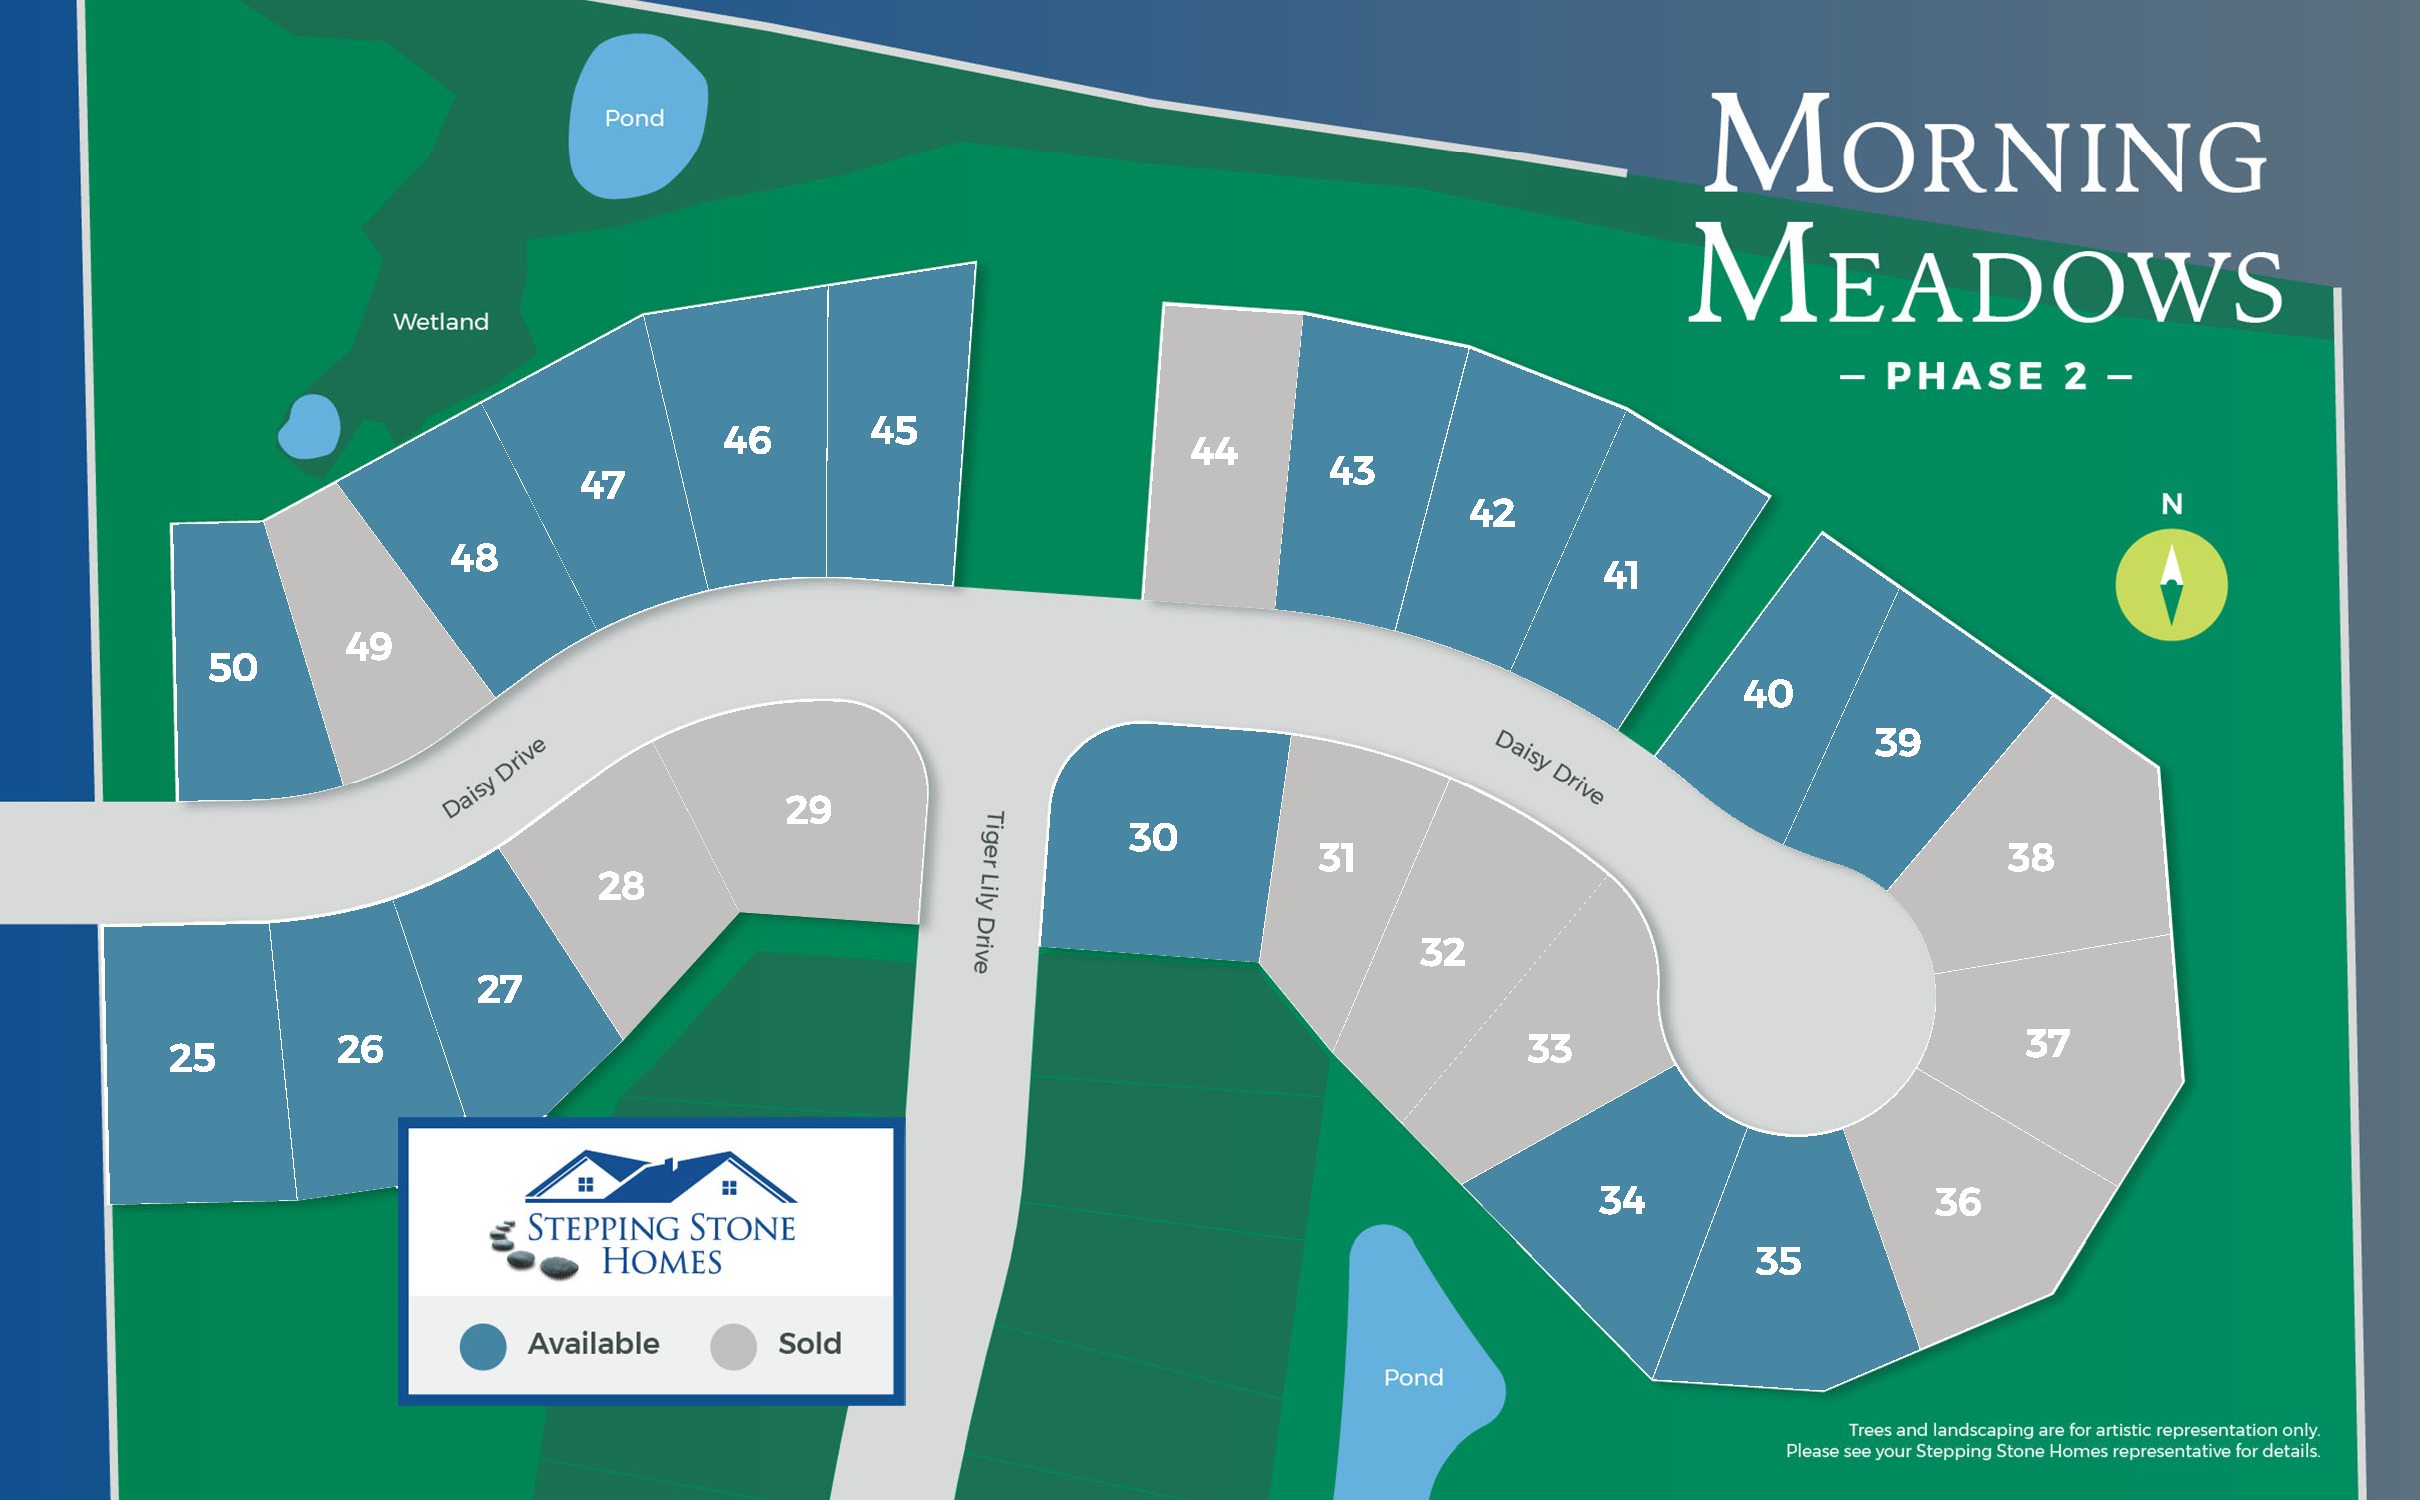 Stepping Stone Homes Morning Meadows Community Phase 2